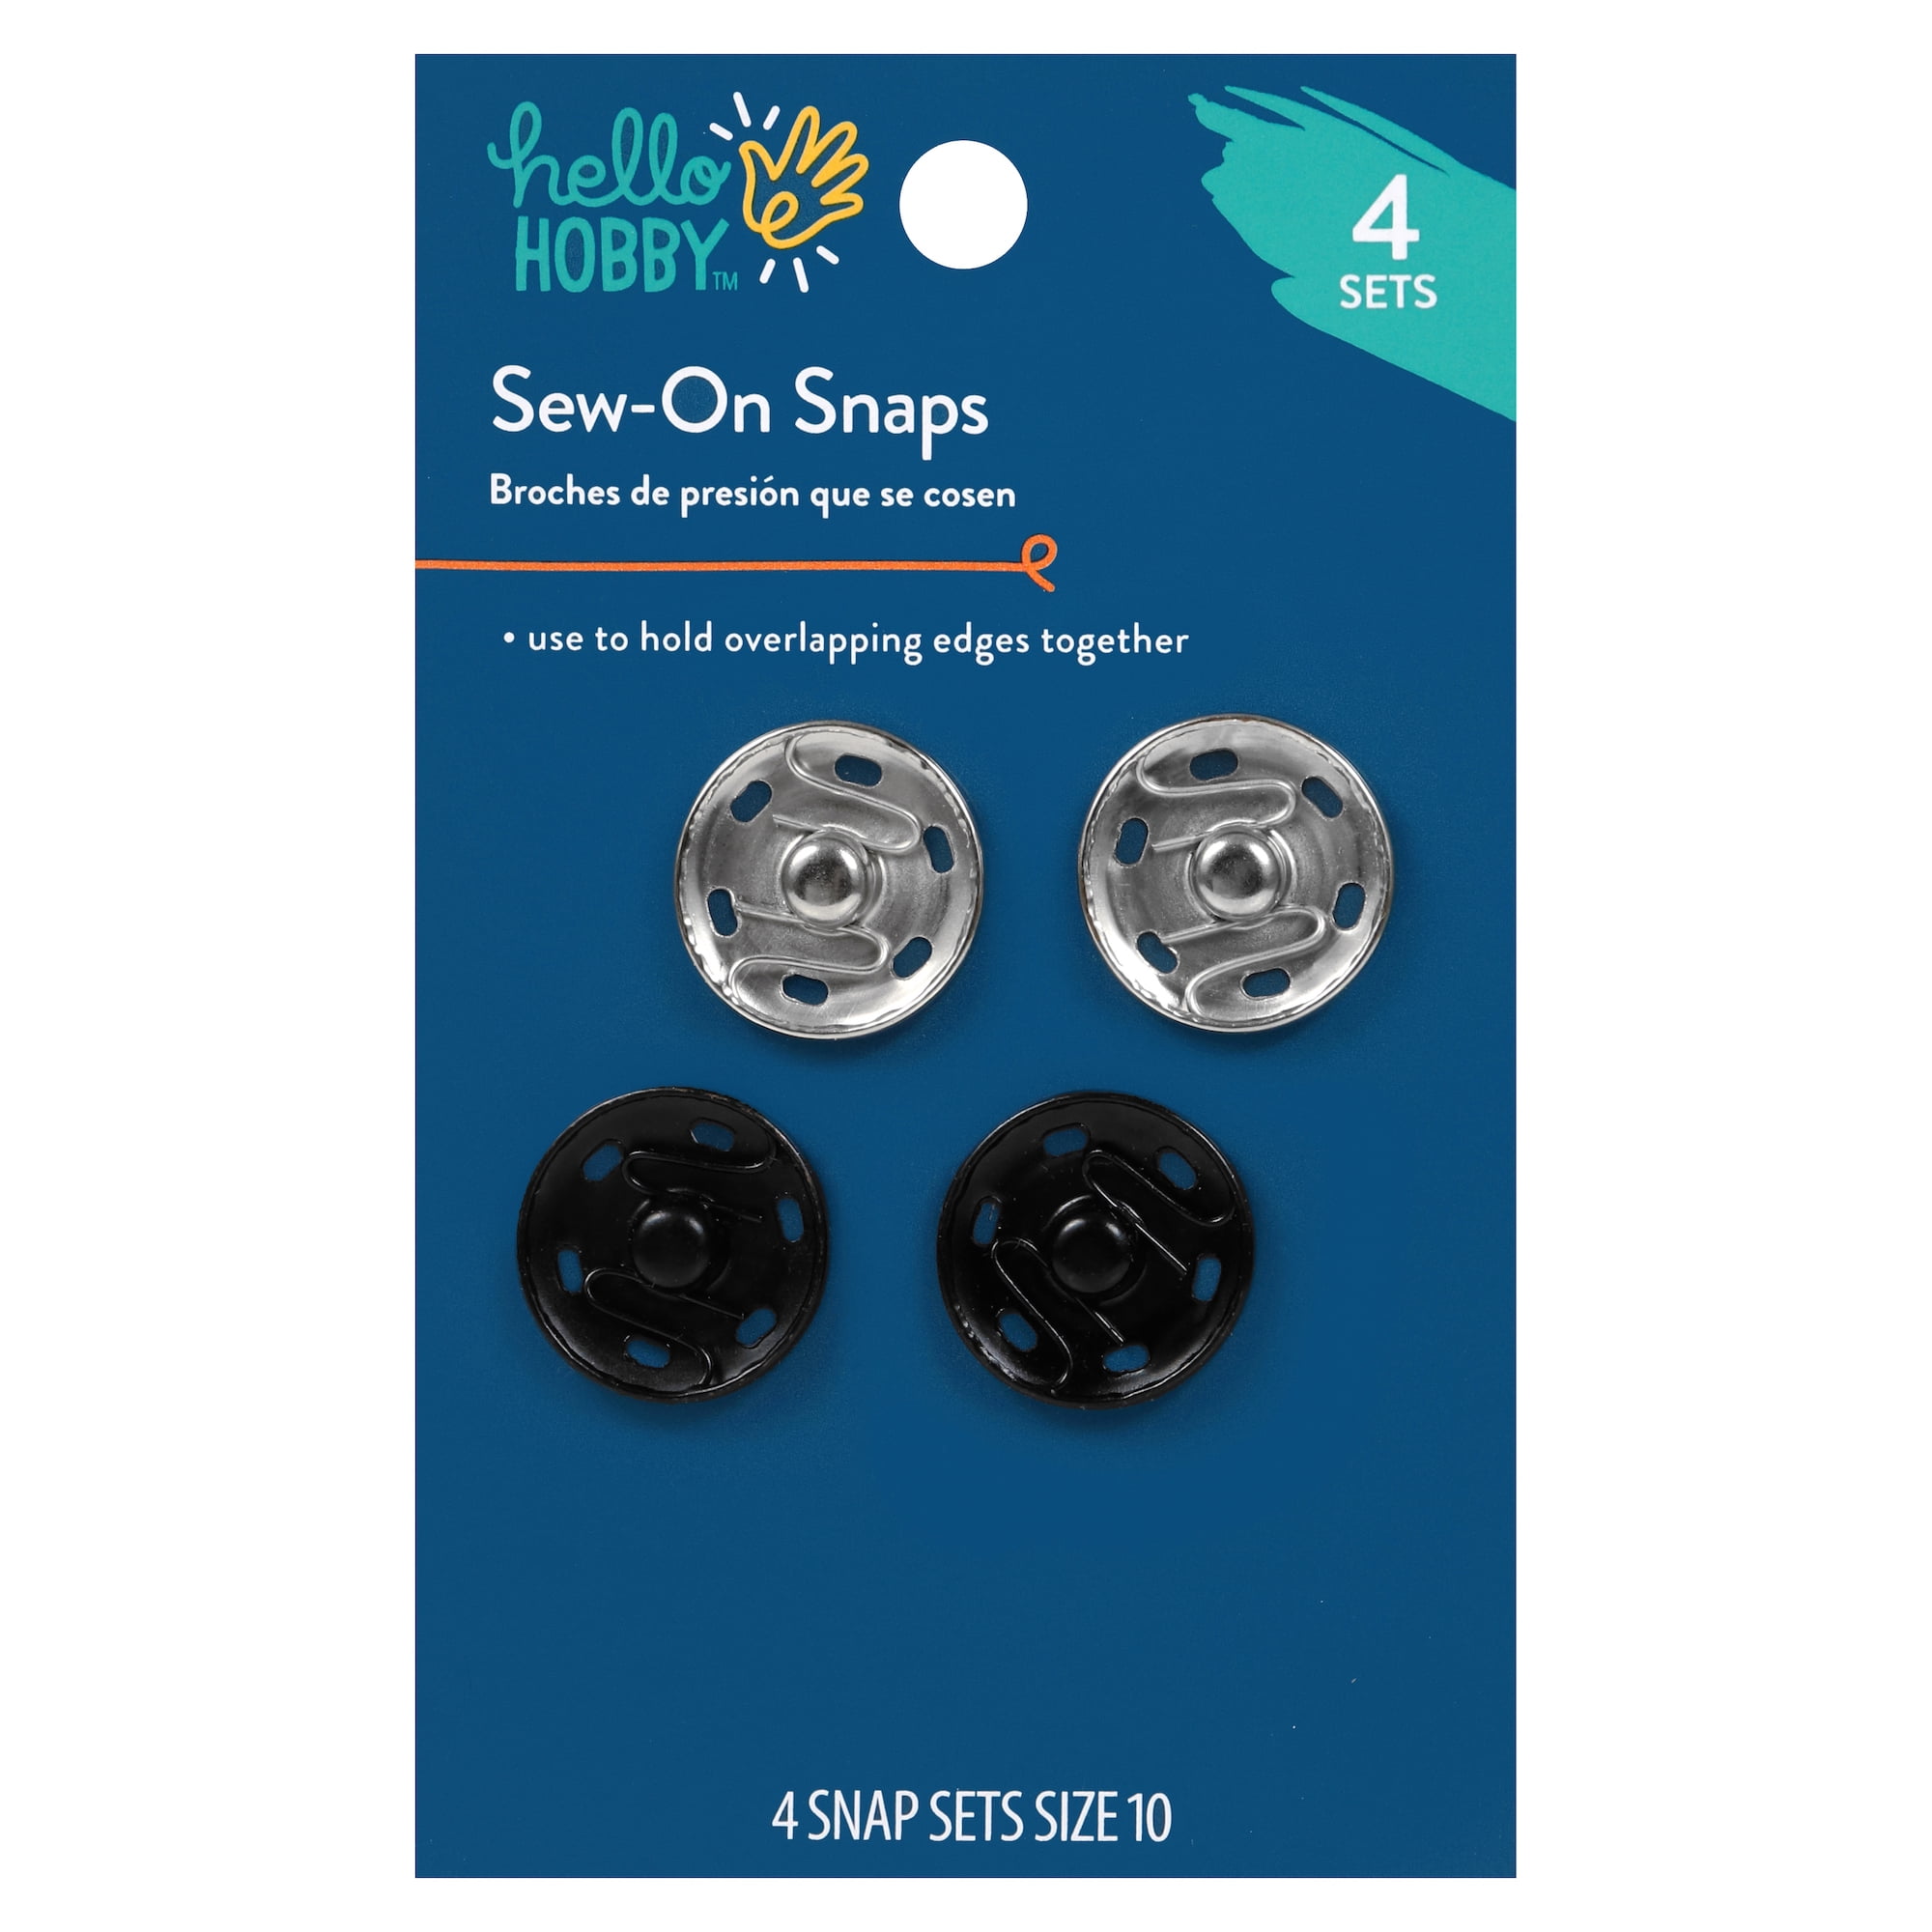 Black Sew-On Snap Buttons, Sewing Supplies for Crafts (0.39 in, 500 Pairs)